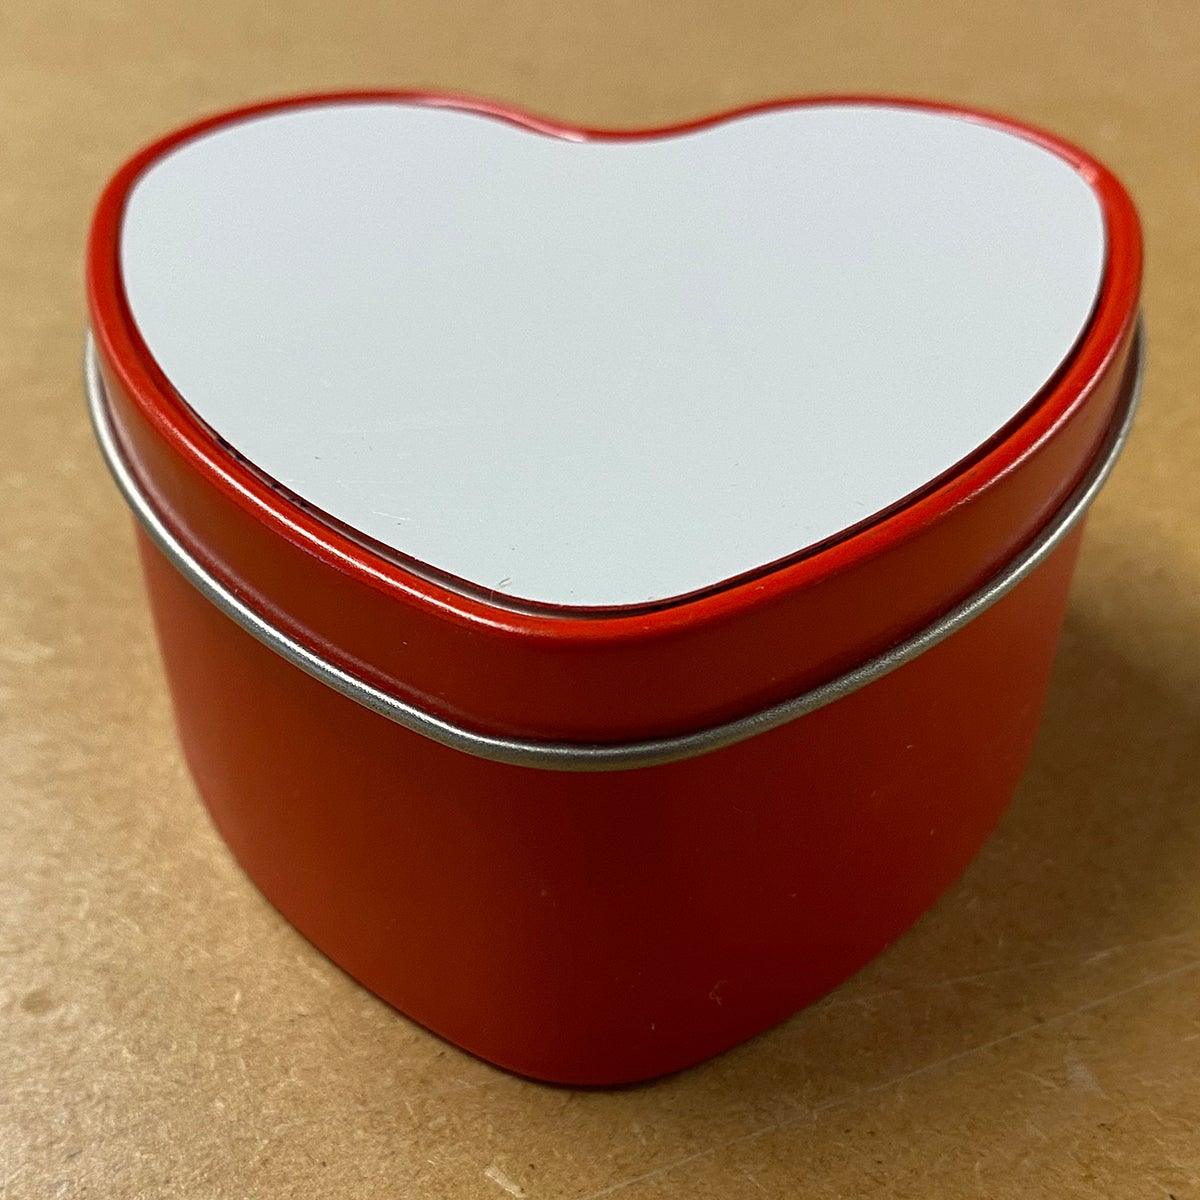 Merry Christmas Heart Tin Red Heart Shaped Tins With Scented Rose Candle for him or her - shopquality4u